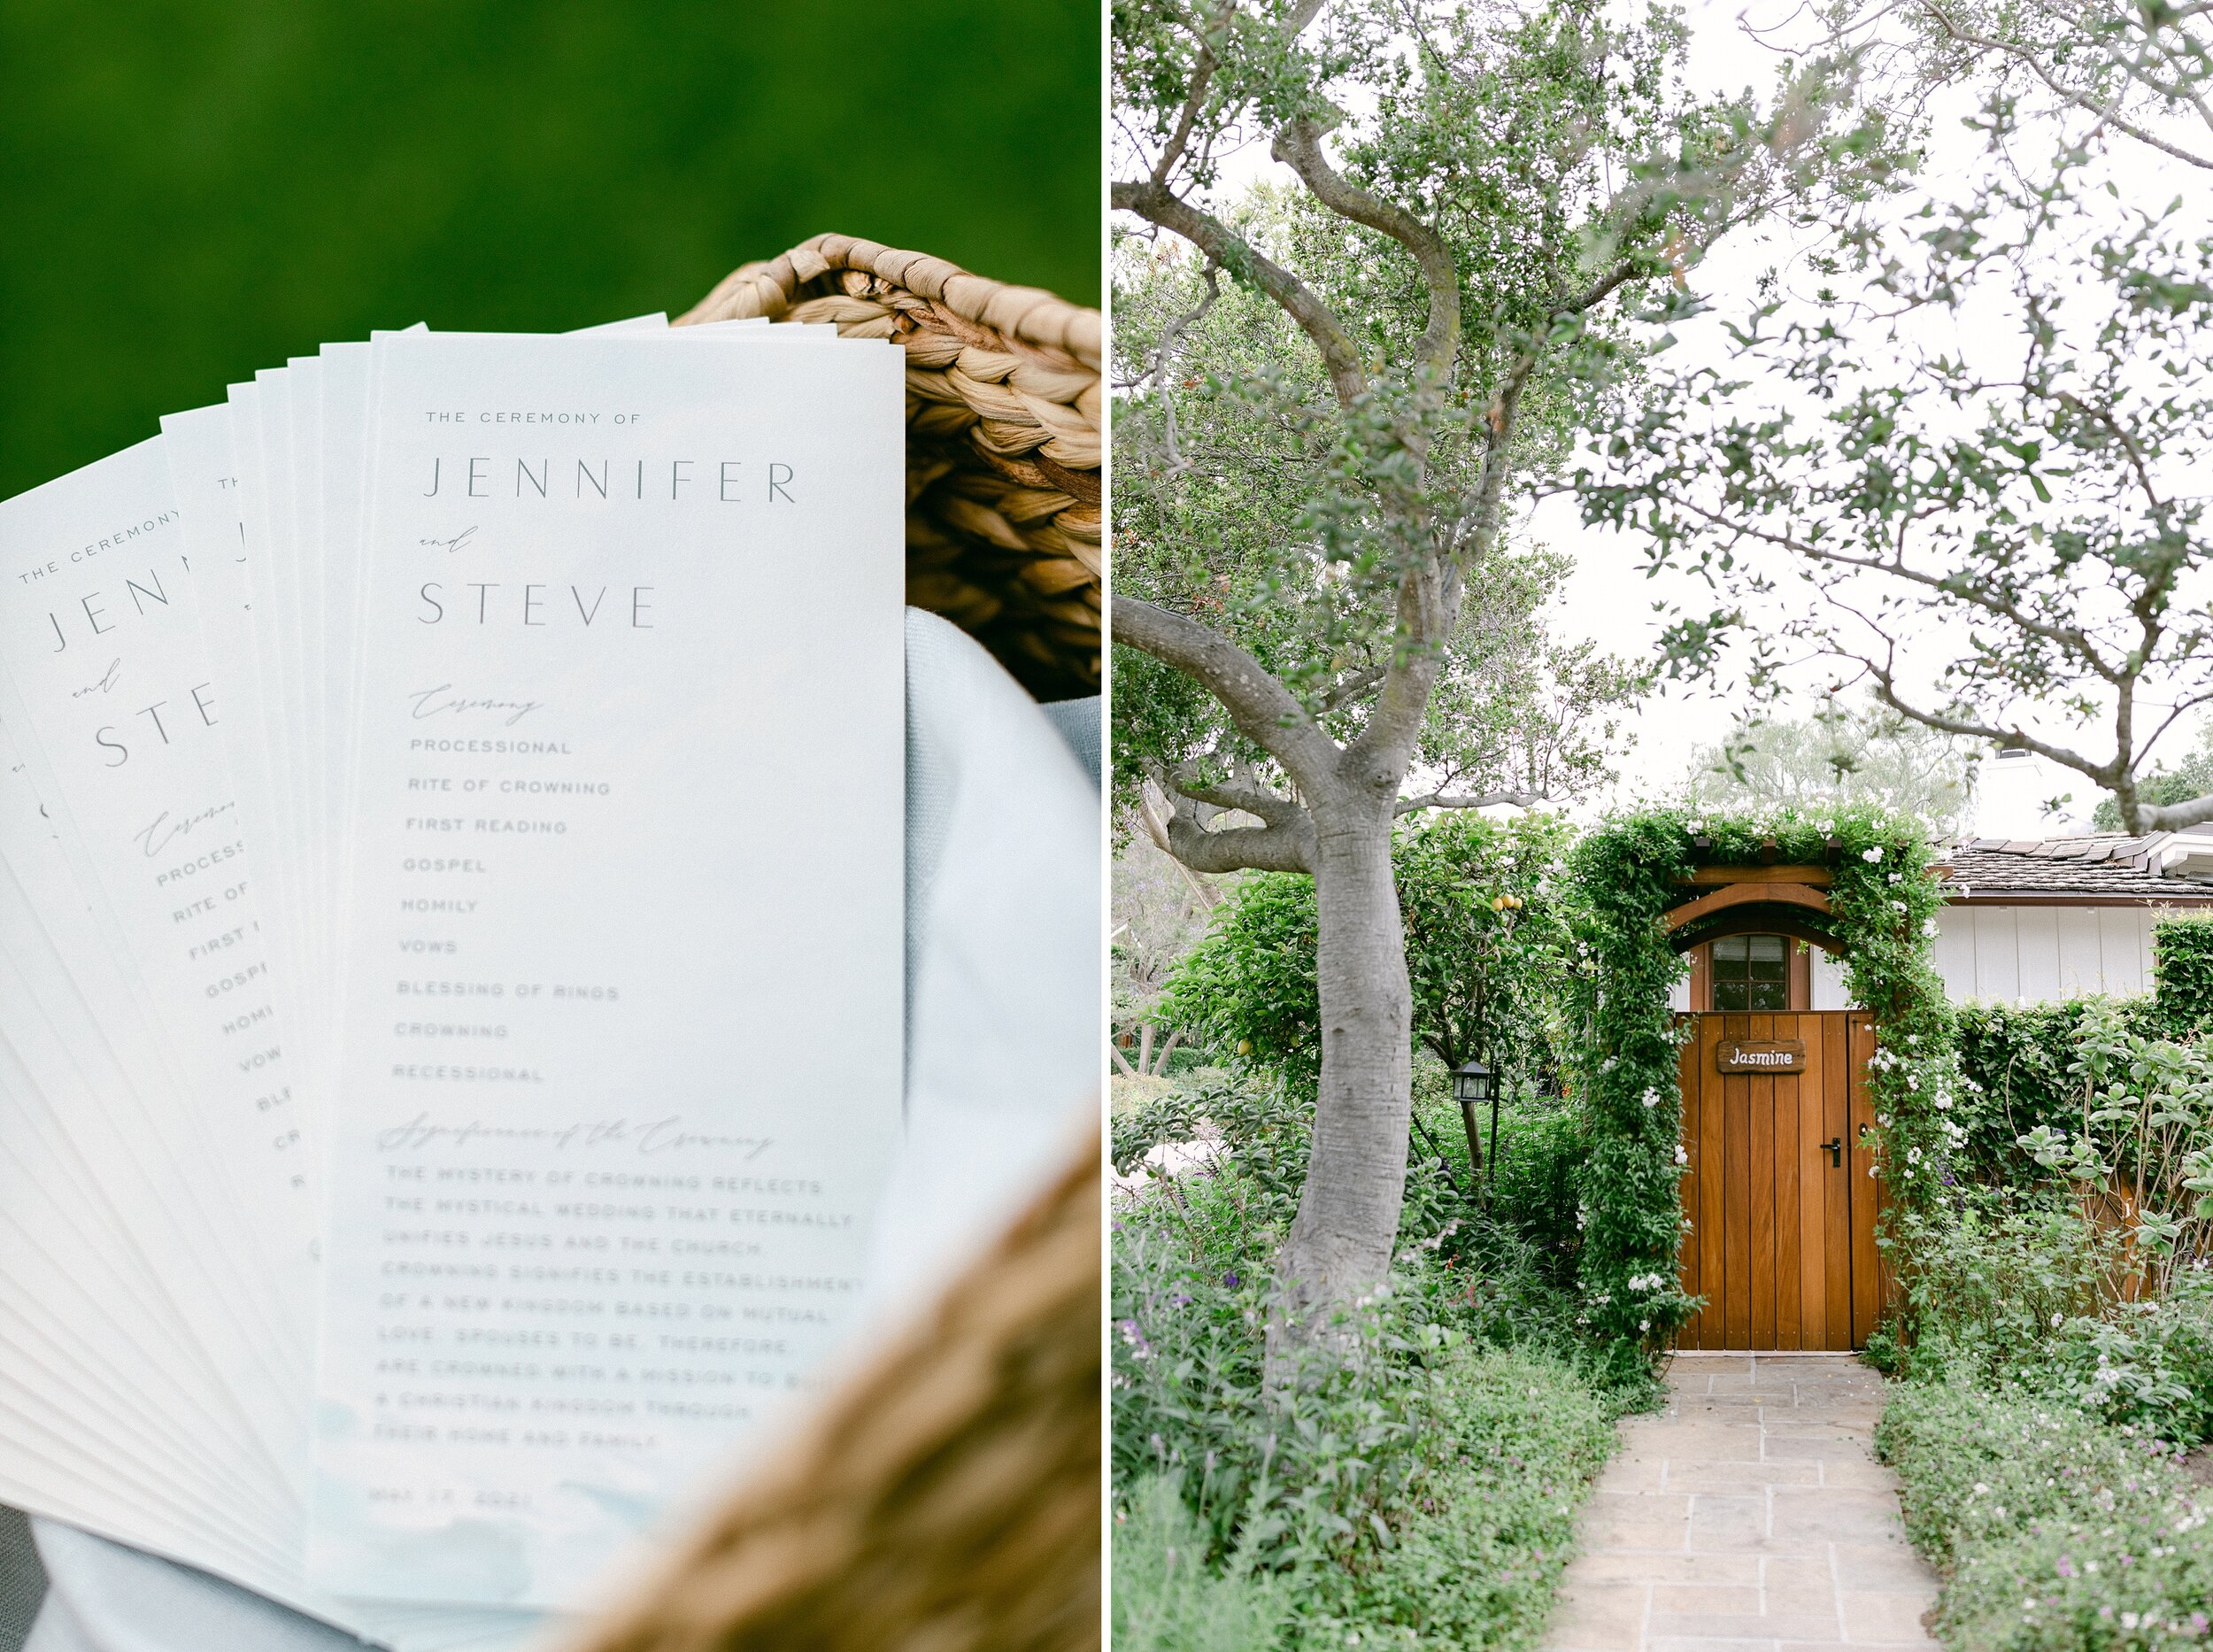 Wedding programs displayed in a wicker basket for this intimate San Ysidro Ranch micro wedding